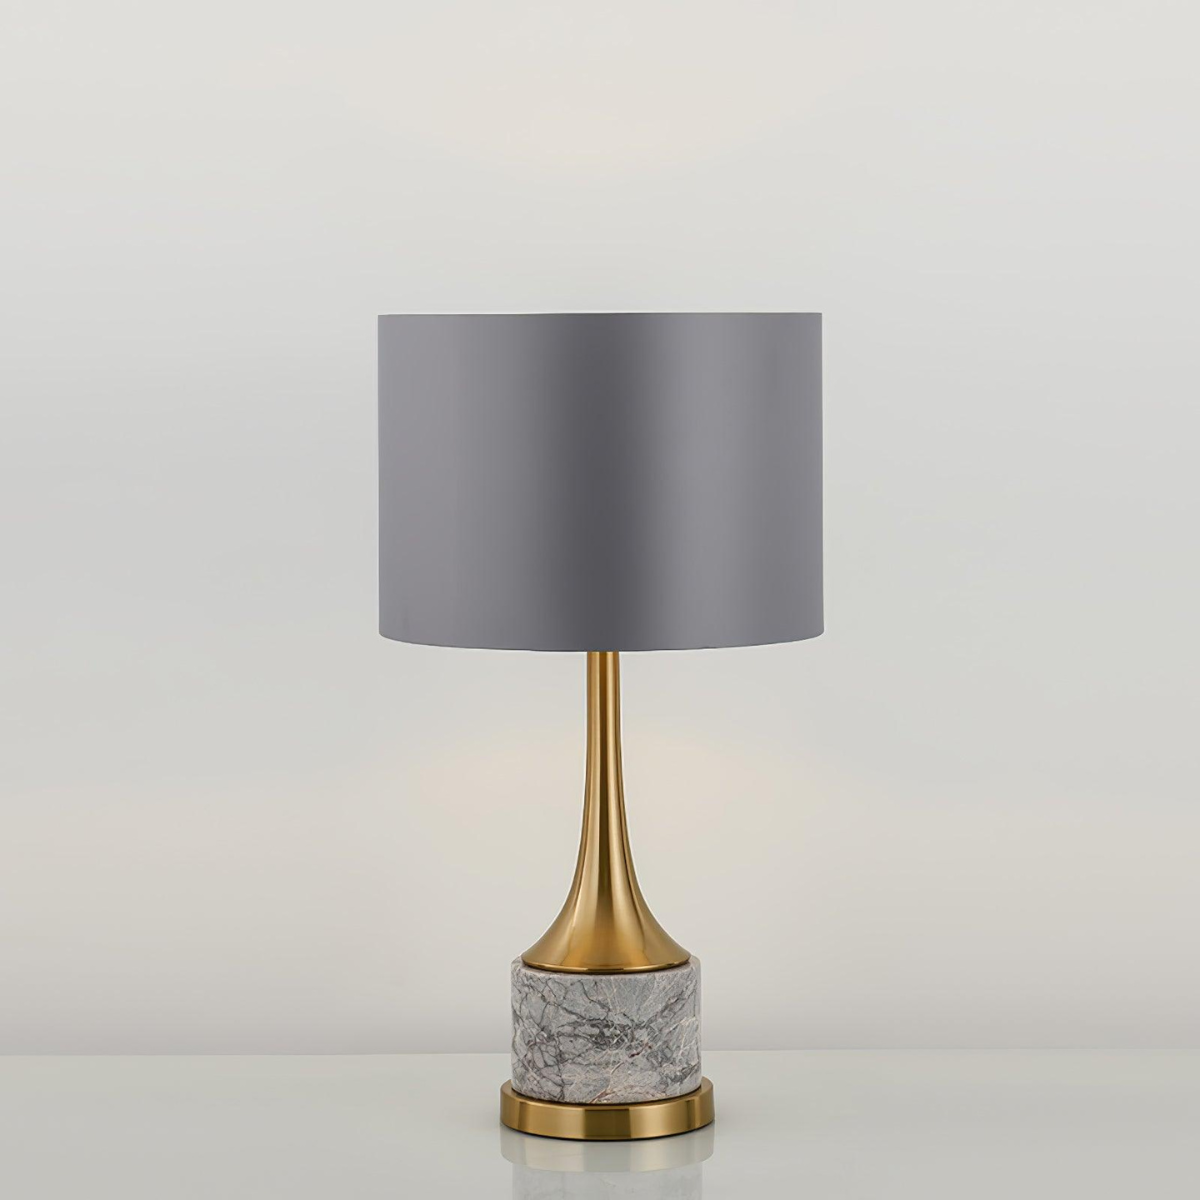 Dominion-Metal-Based-Modern-Bedside-Table-Lamp-5